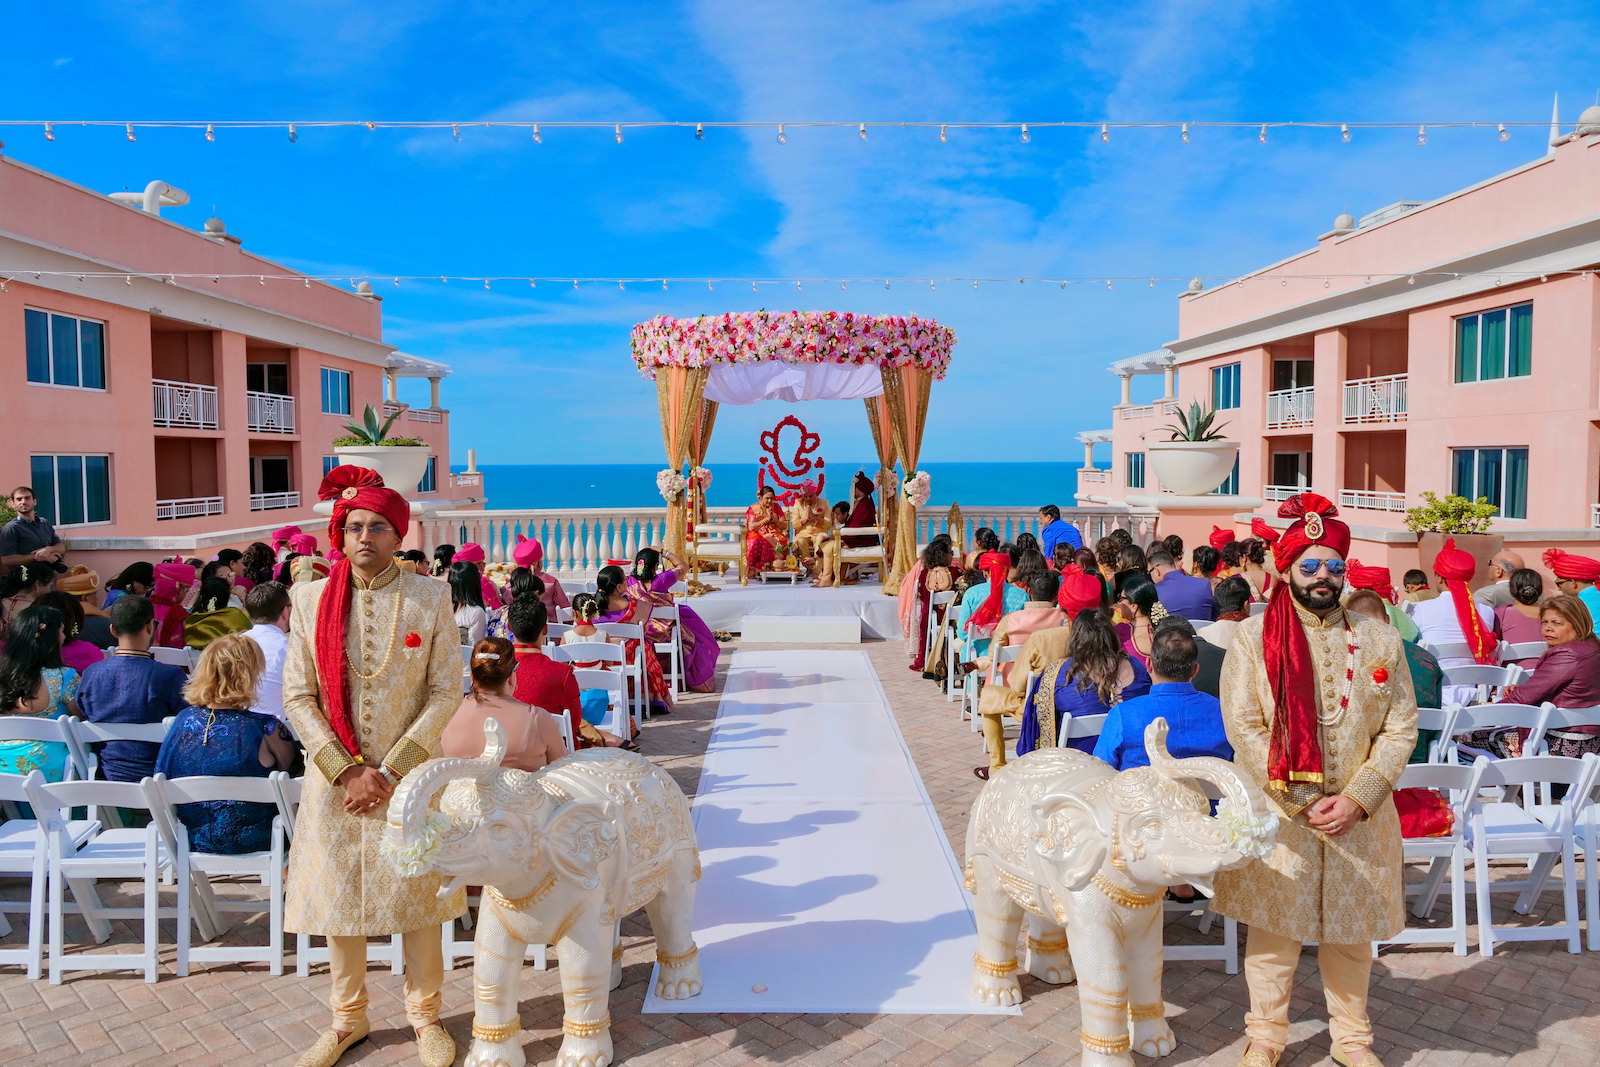 Rooftop Indian Wedding Ceremony at Clearwater Wedding Venue Hyatt Regency Clearwater Beach | Ivory and Gold Elephant Statues at Ceremony Aisle | Pink and Gold Mandap with Draping and Roses